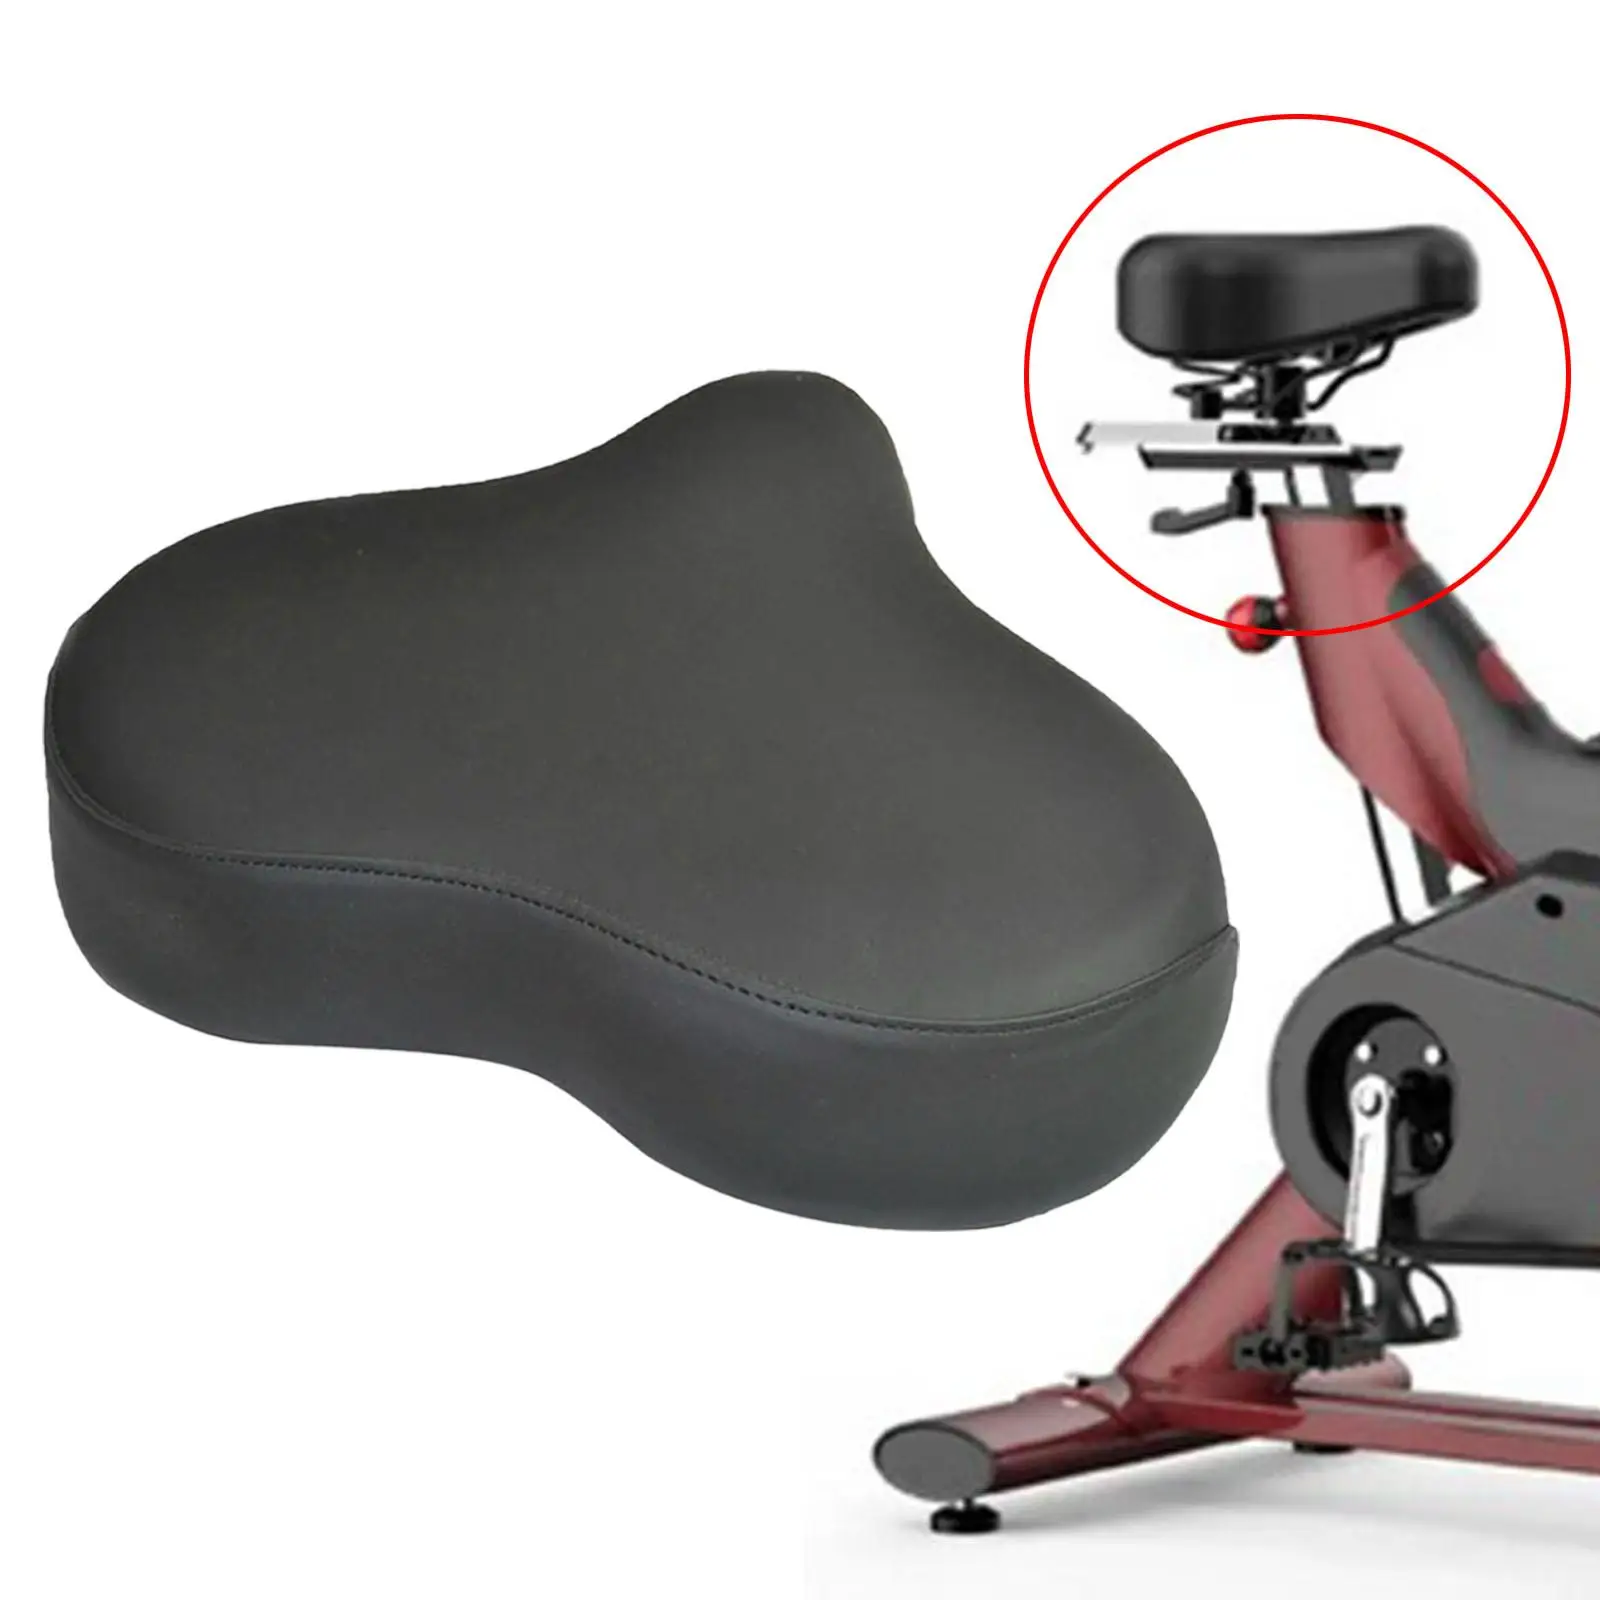 Indoor Bike Seat Cover Cushion Accessory for Women Men Anti Slip Replaces